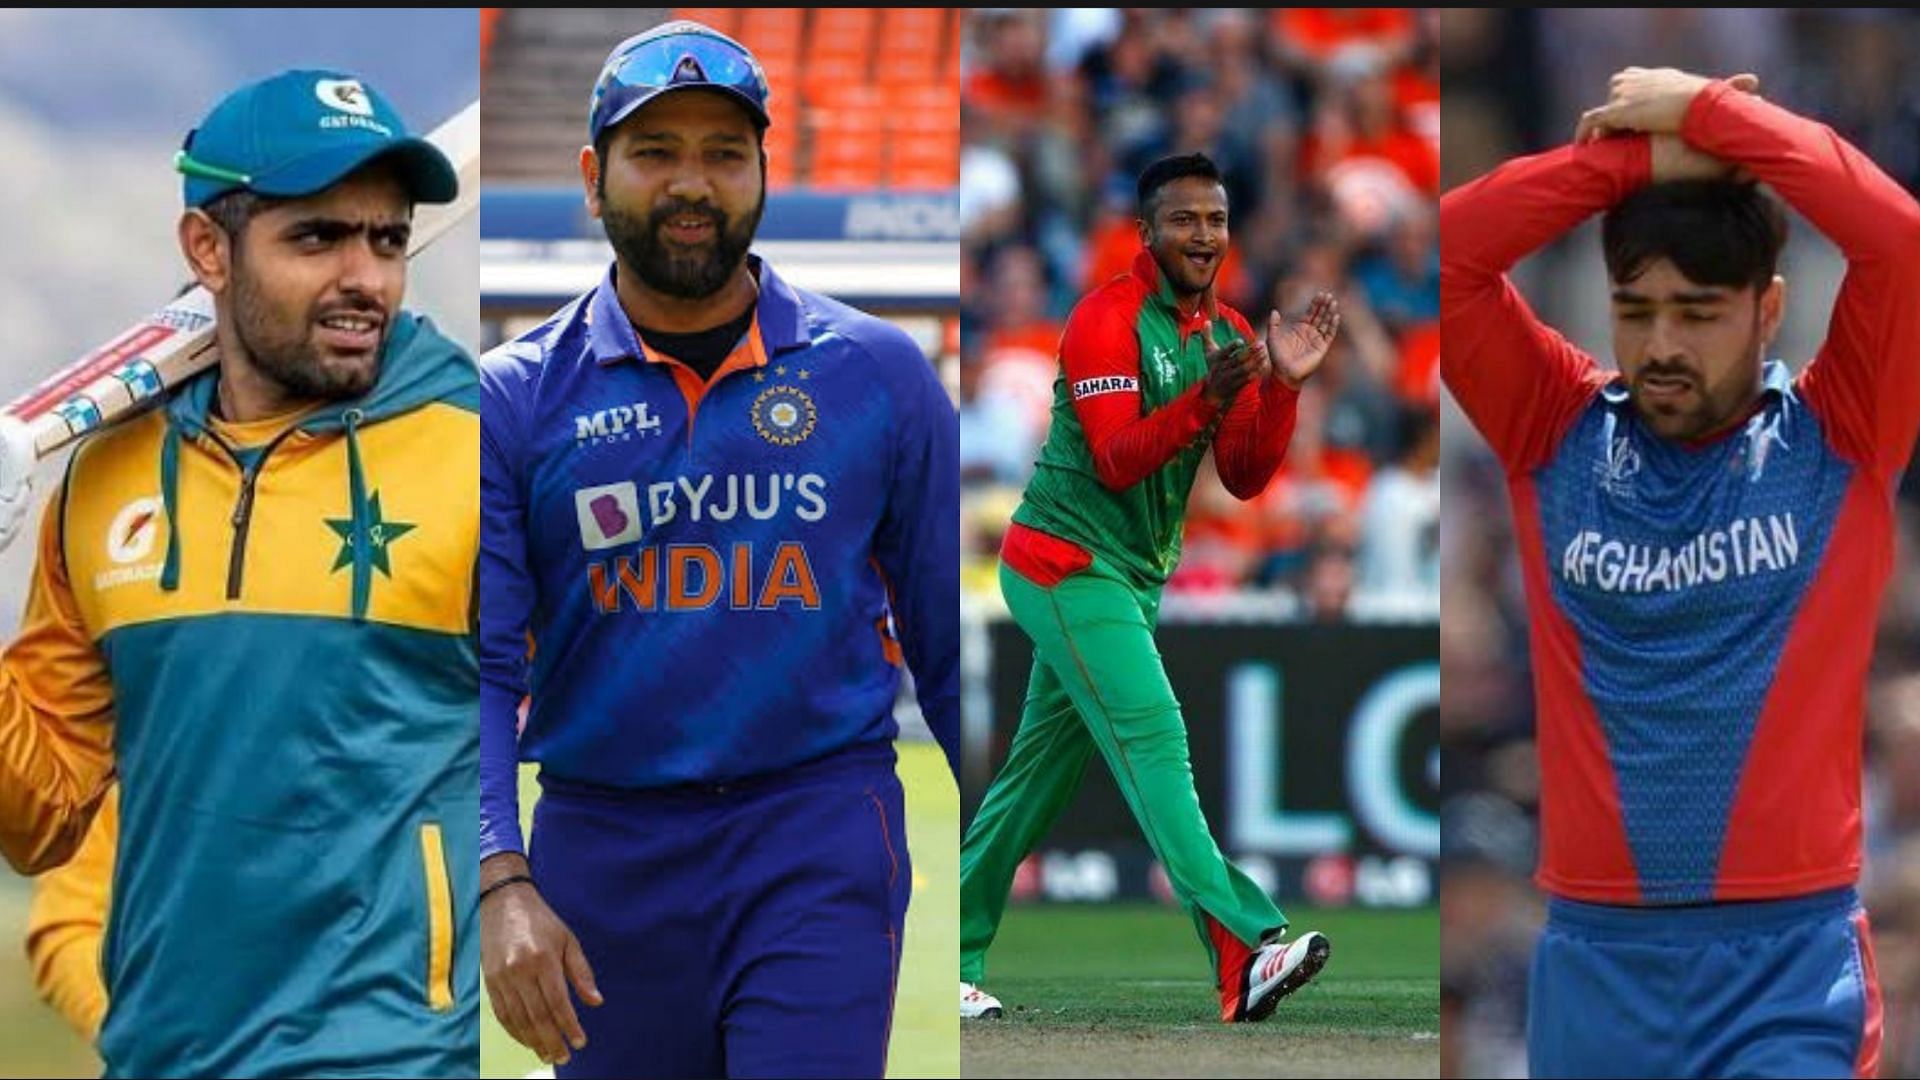 The 2022 edition of the Asia Cup will get underway this Saturday in the United Arab Emirates